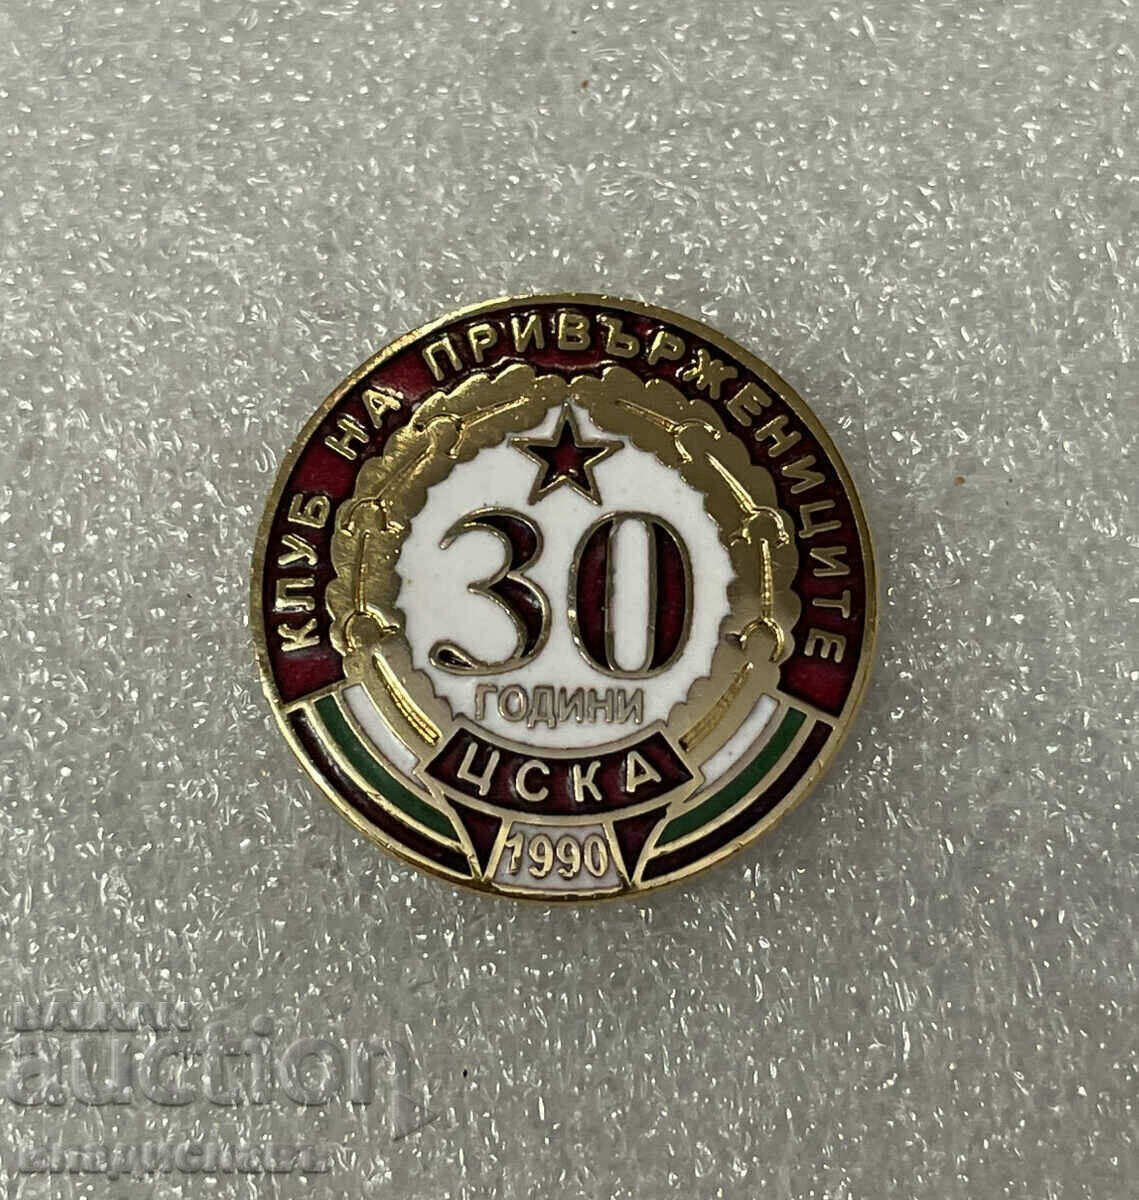 CSKA 30 years supporters club